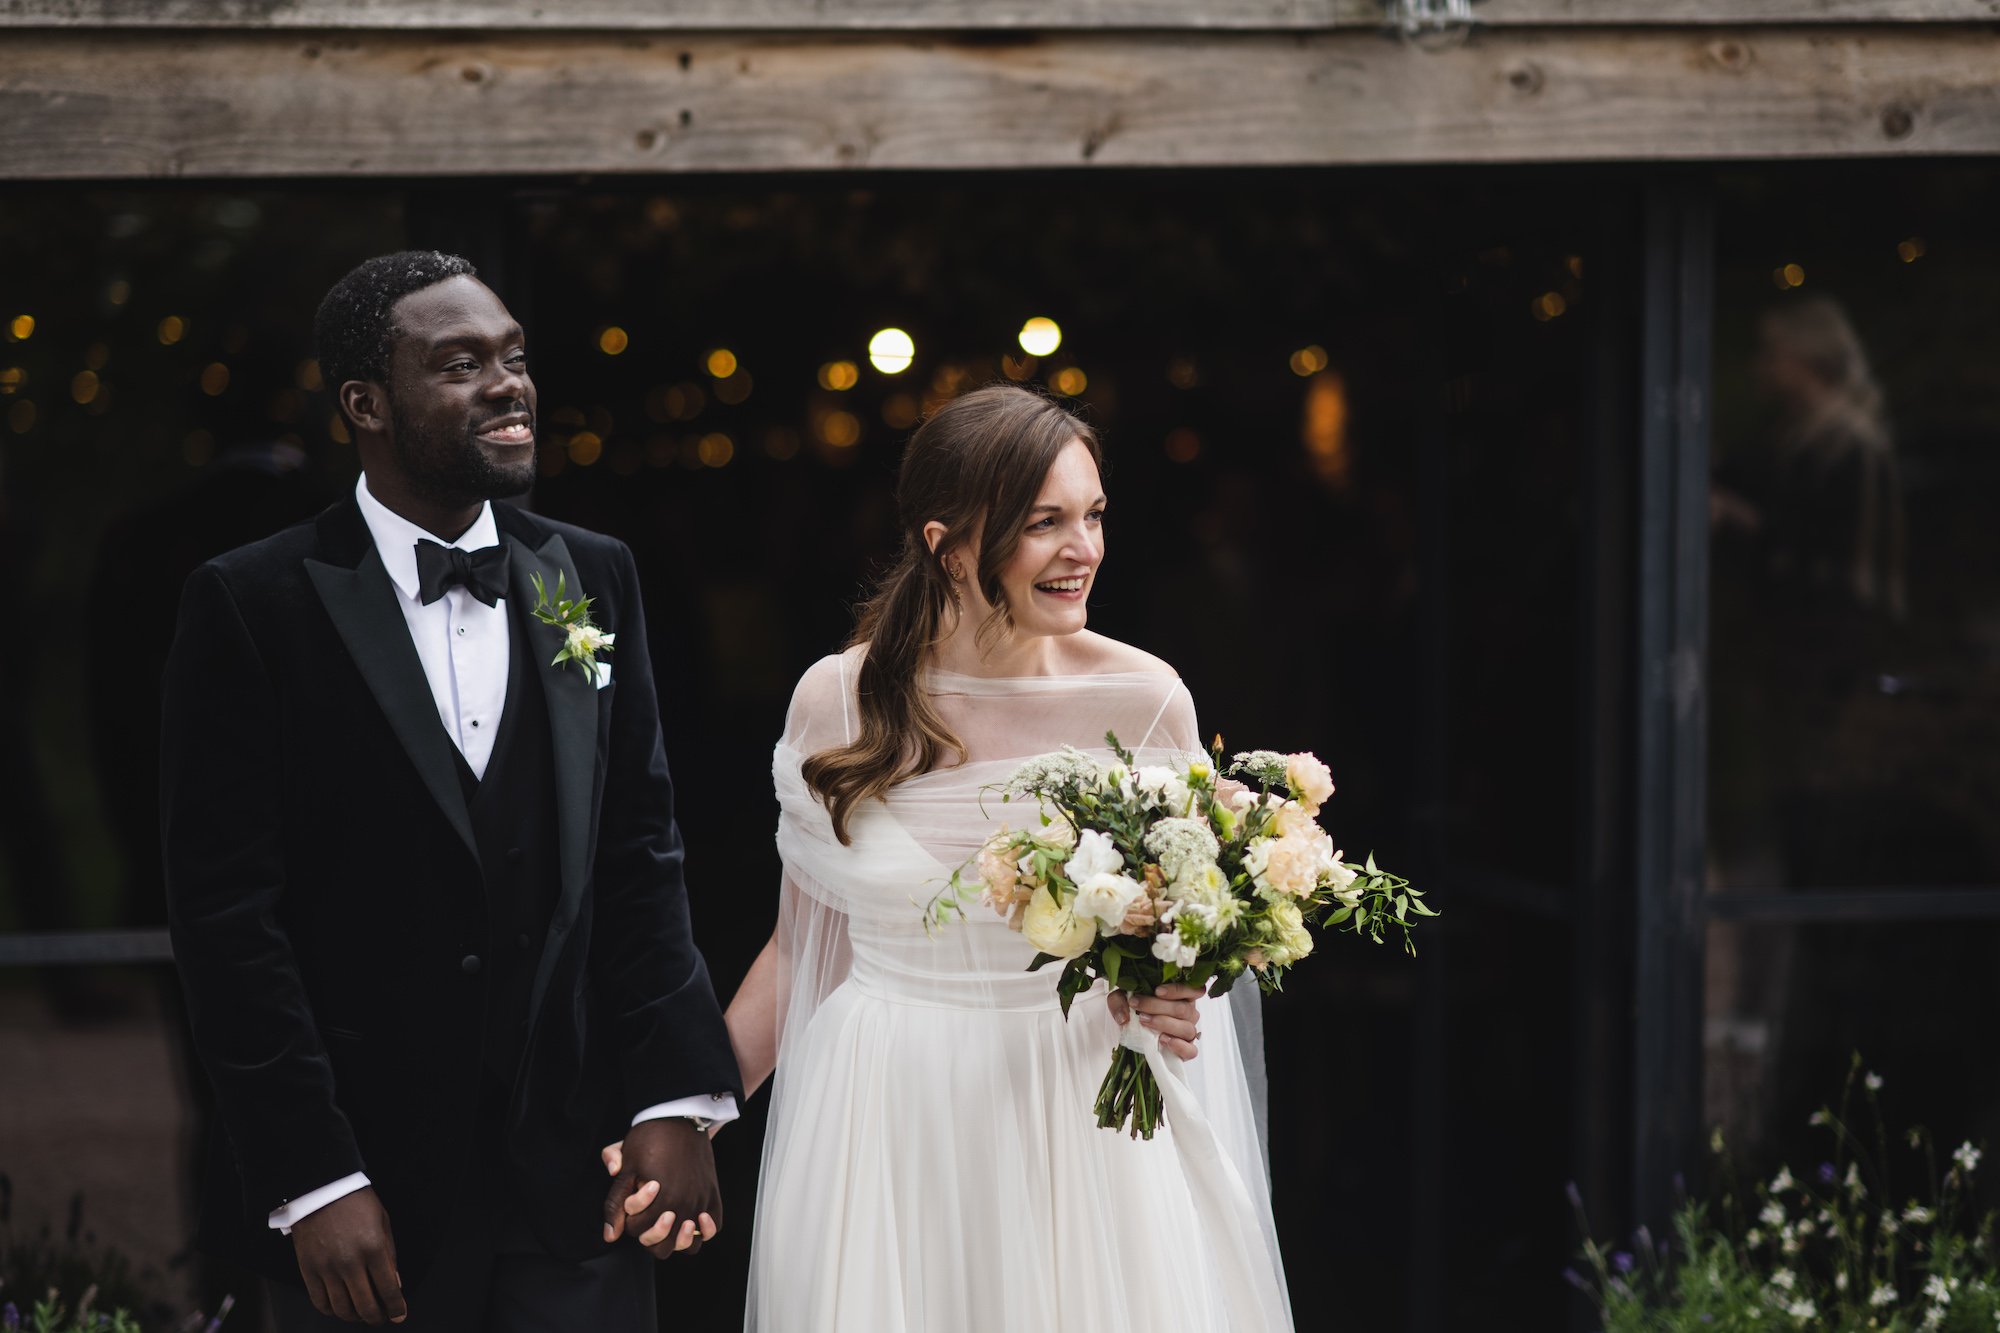 Beautiful bride Emma wore a wedding dress and cape by Halfpenny London